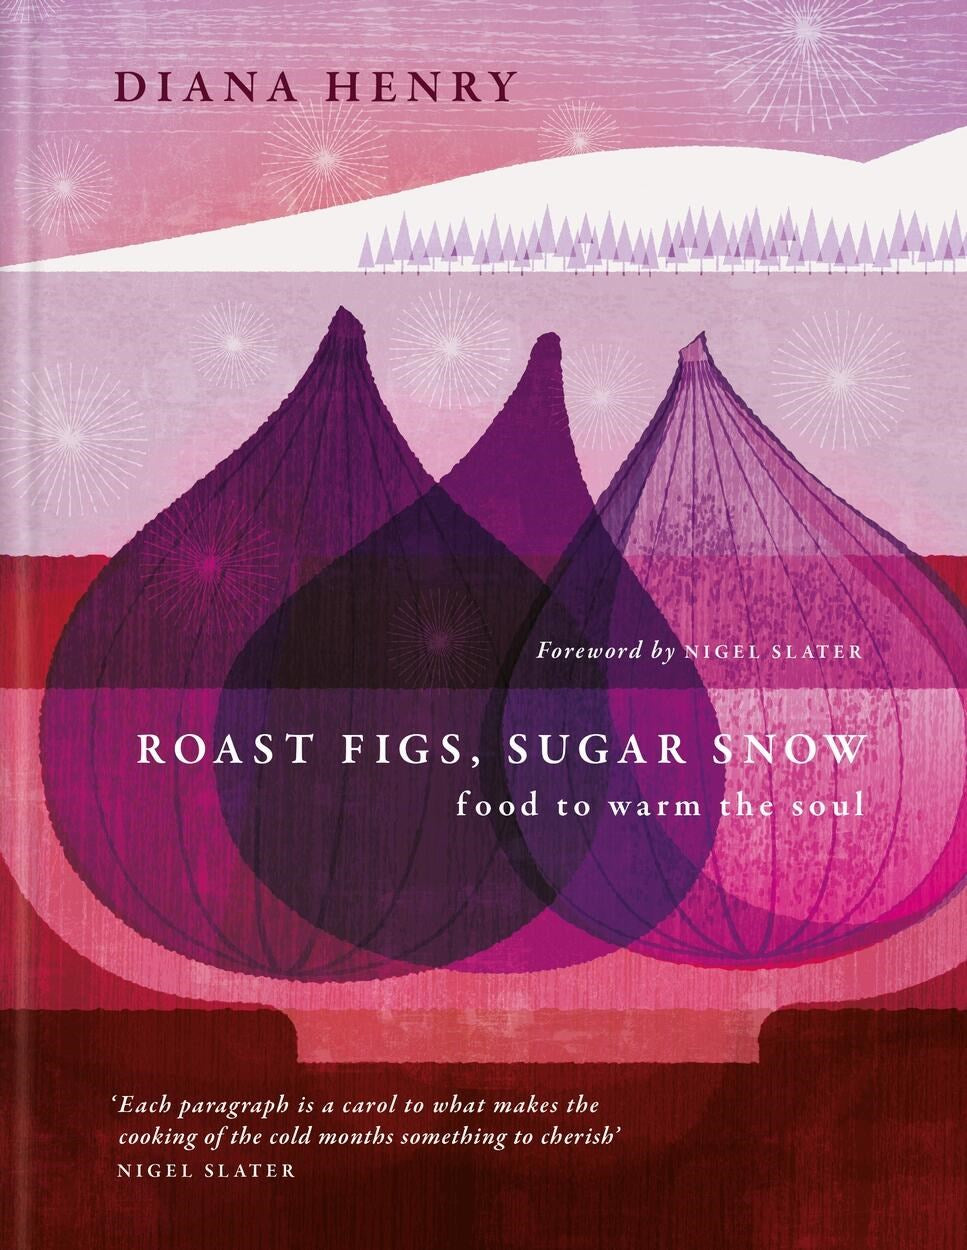 Roast Figs, Sugar Snow by Diana Henry (Introduction by Nigel Slater)